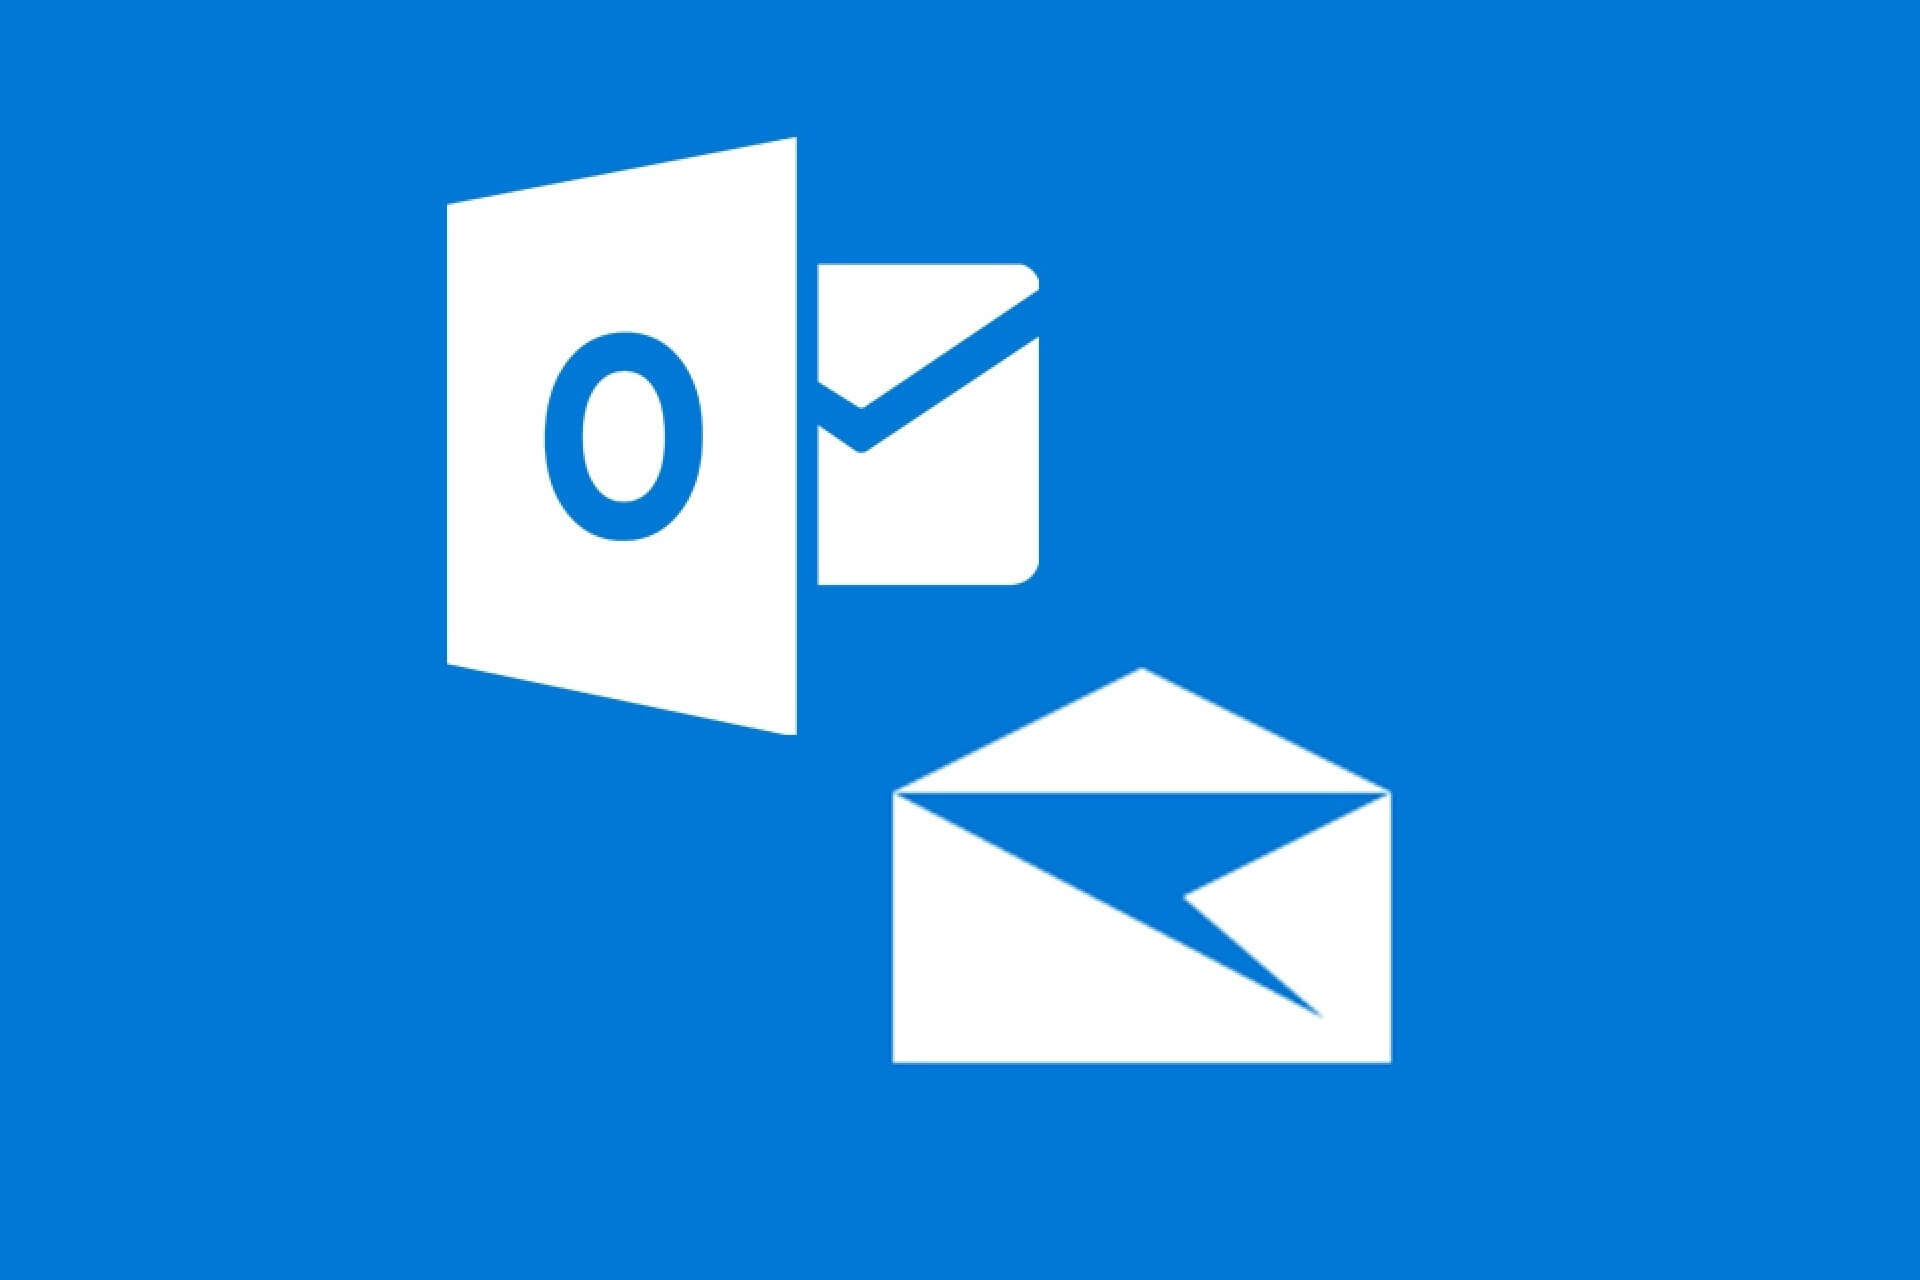 Outlook email error